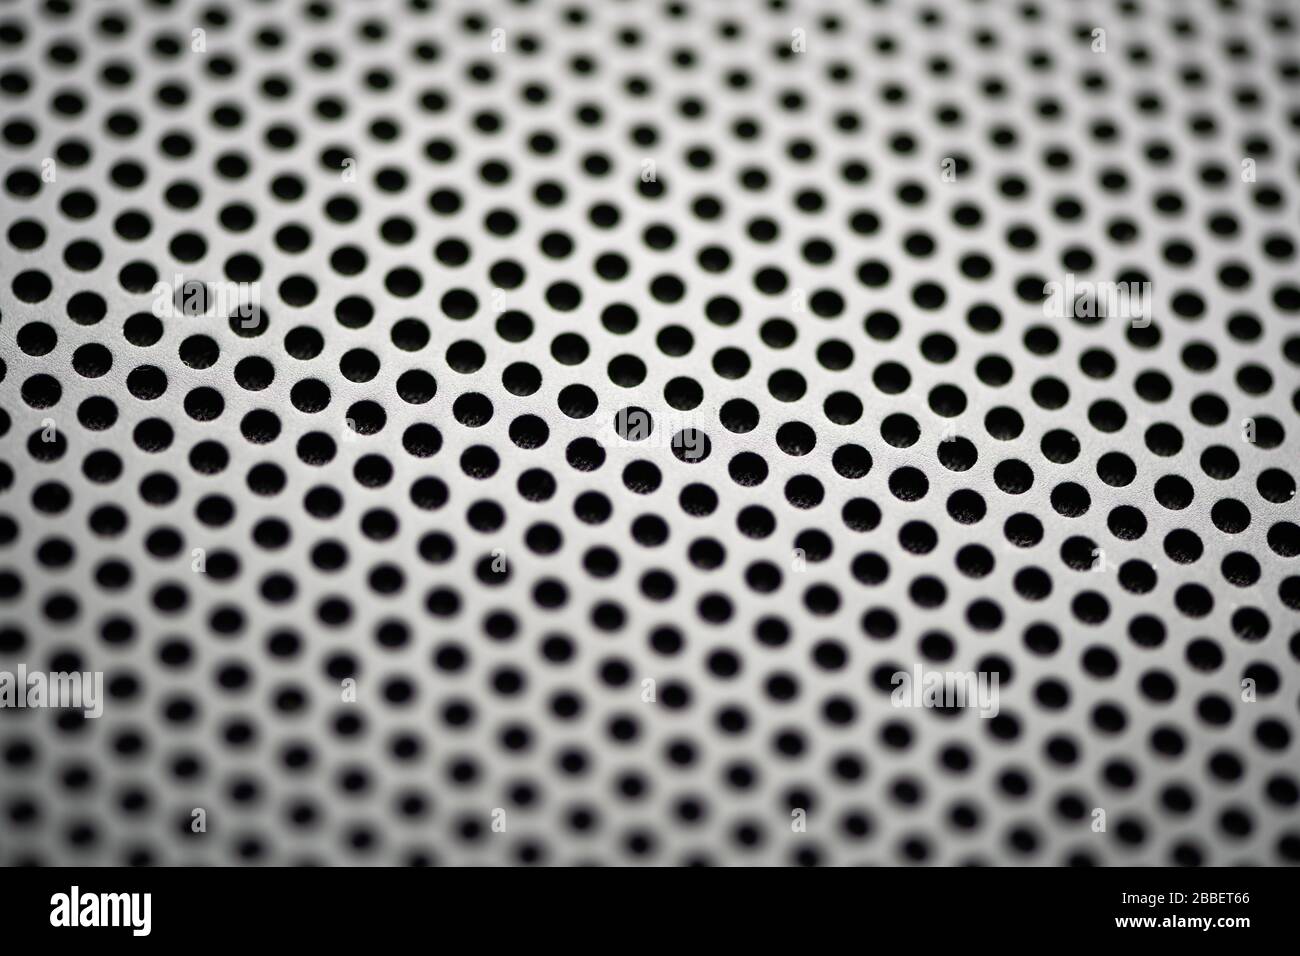 Black Mesh with Round Holes Texture Picture